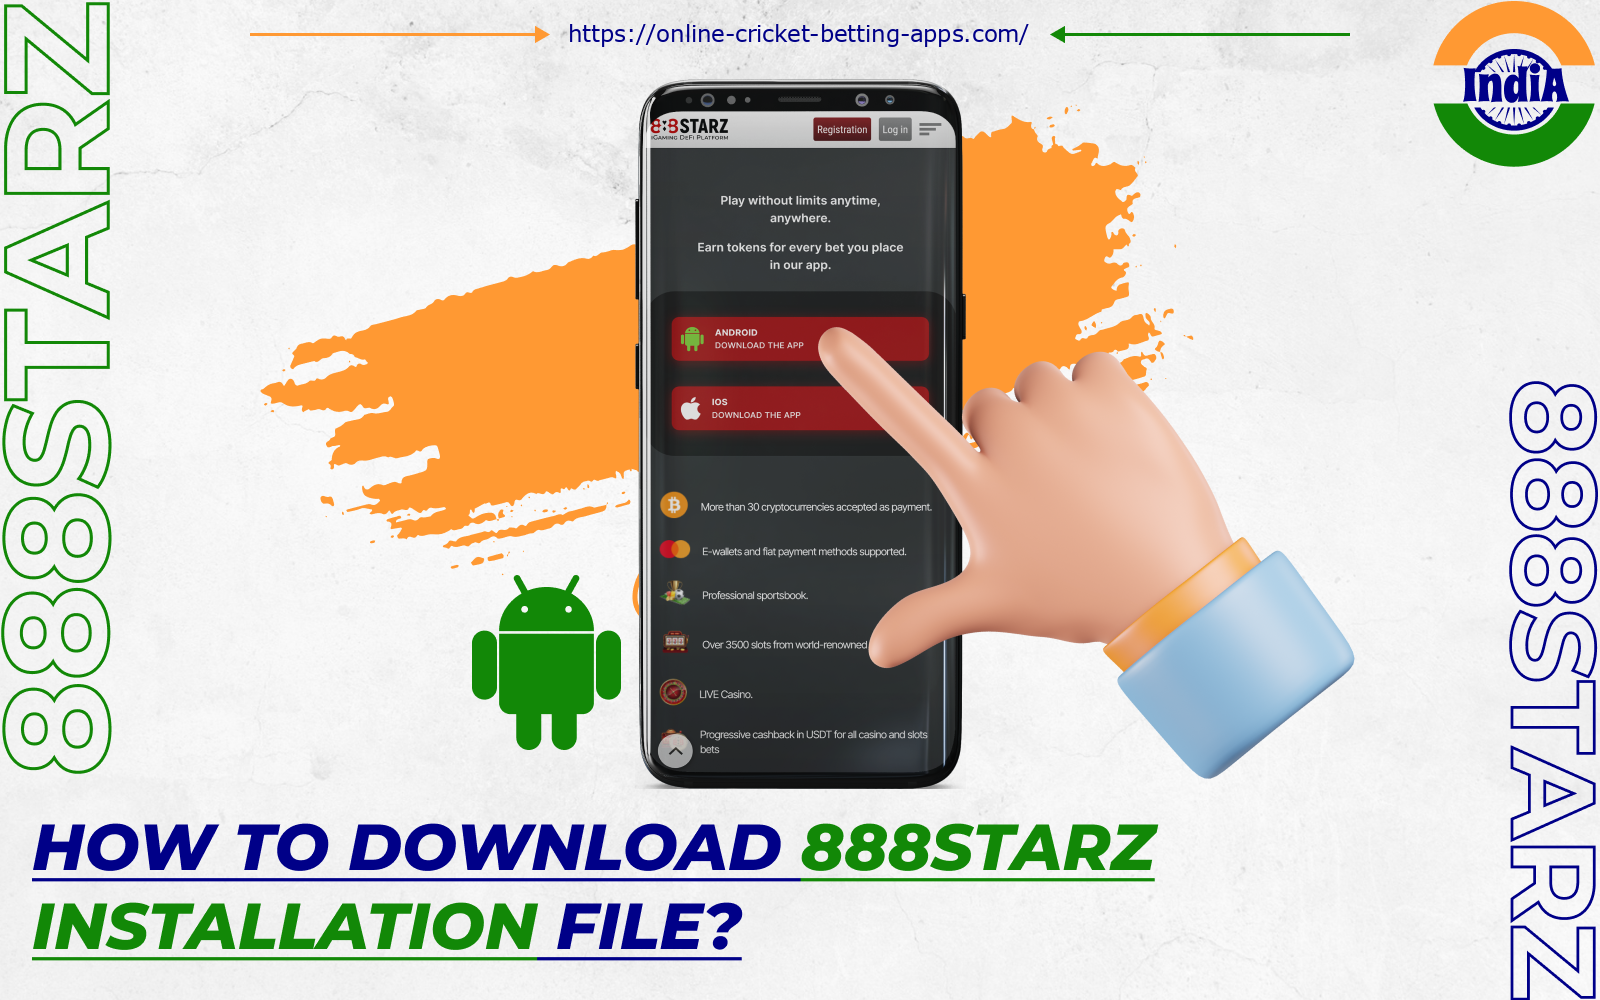 To install the 888 starz app, users from India first need to download the apk file